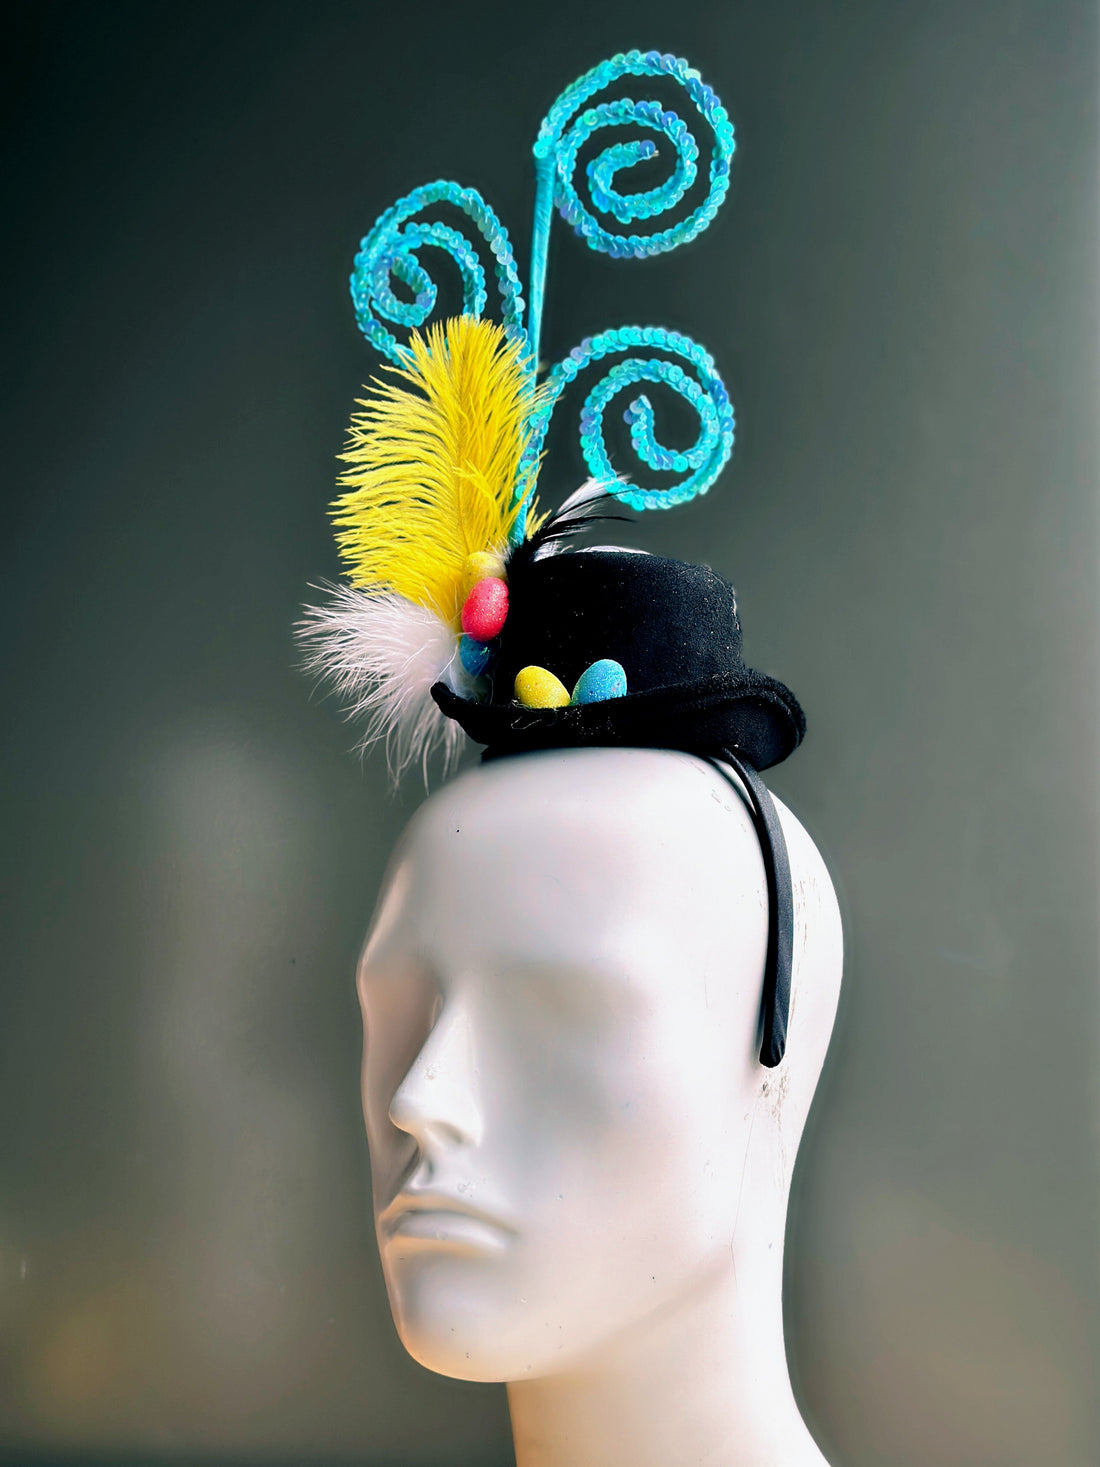 Black hat on a headband with easter eggs, feathers, and blue swirls.